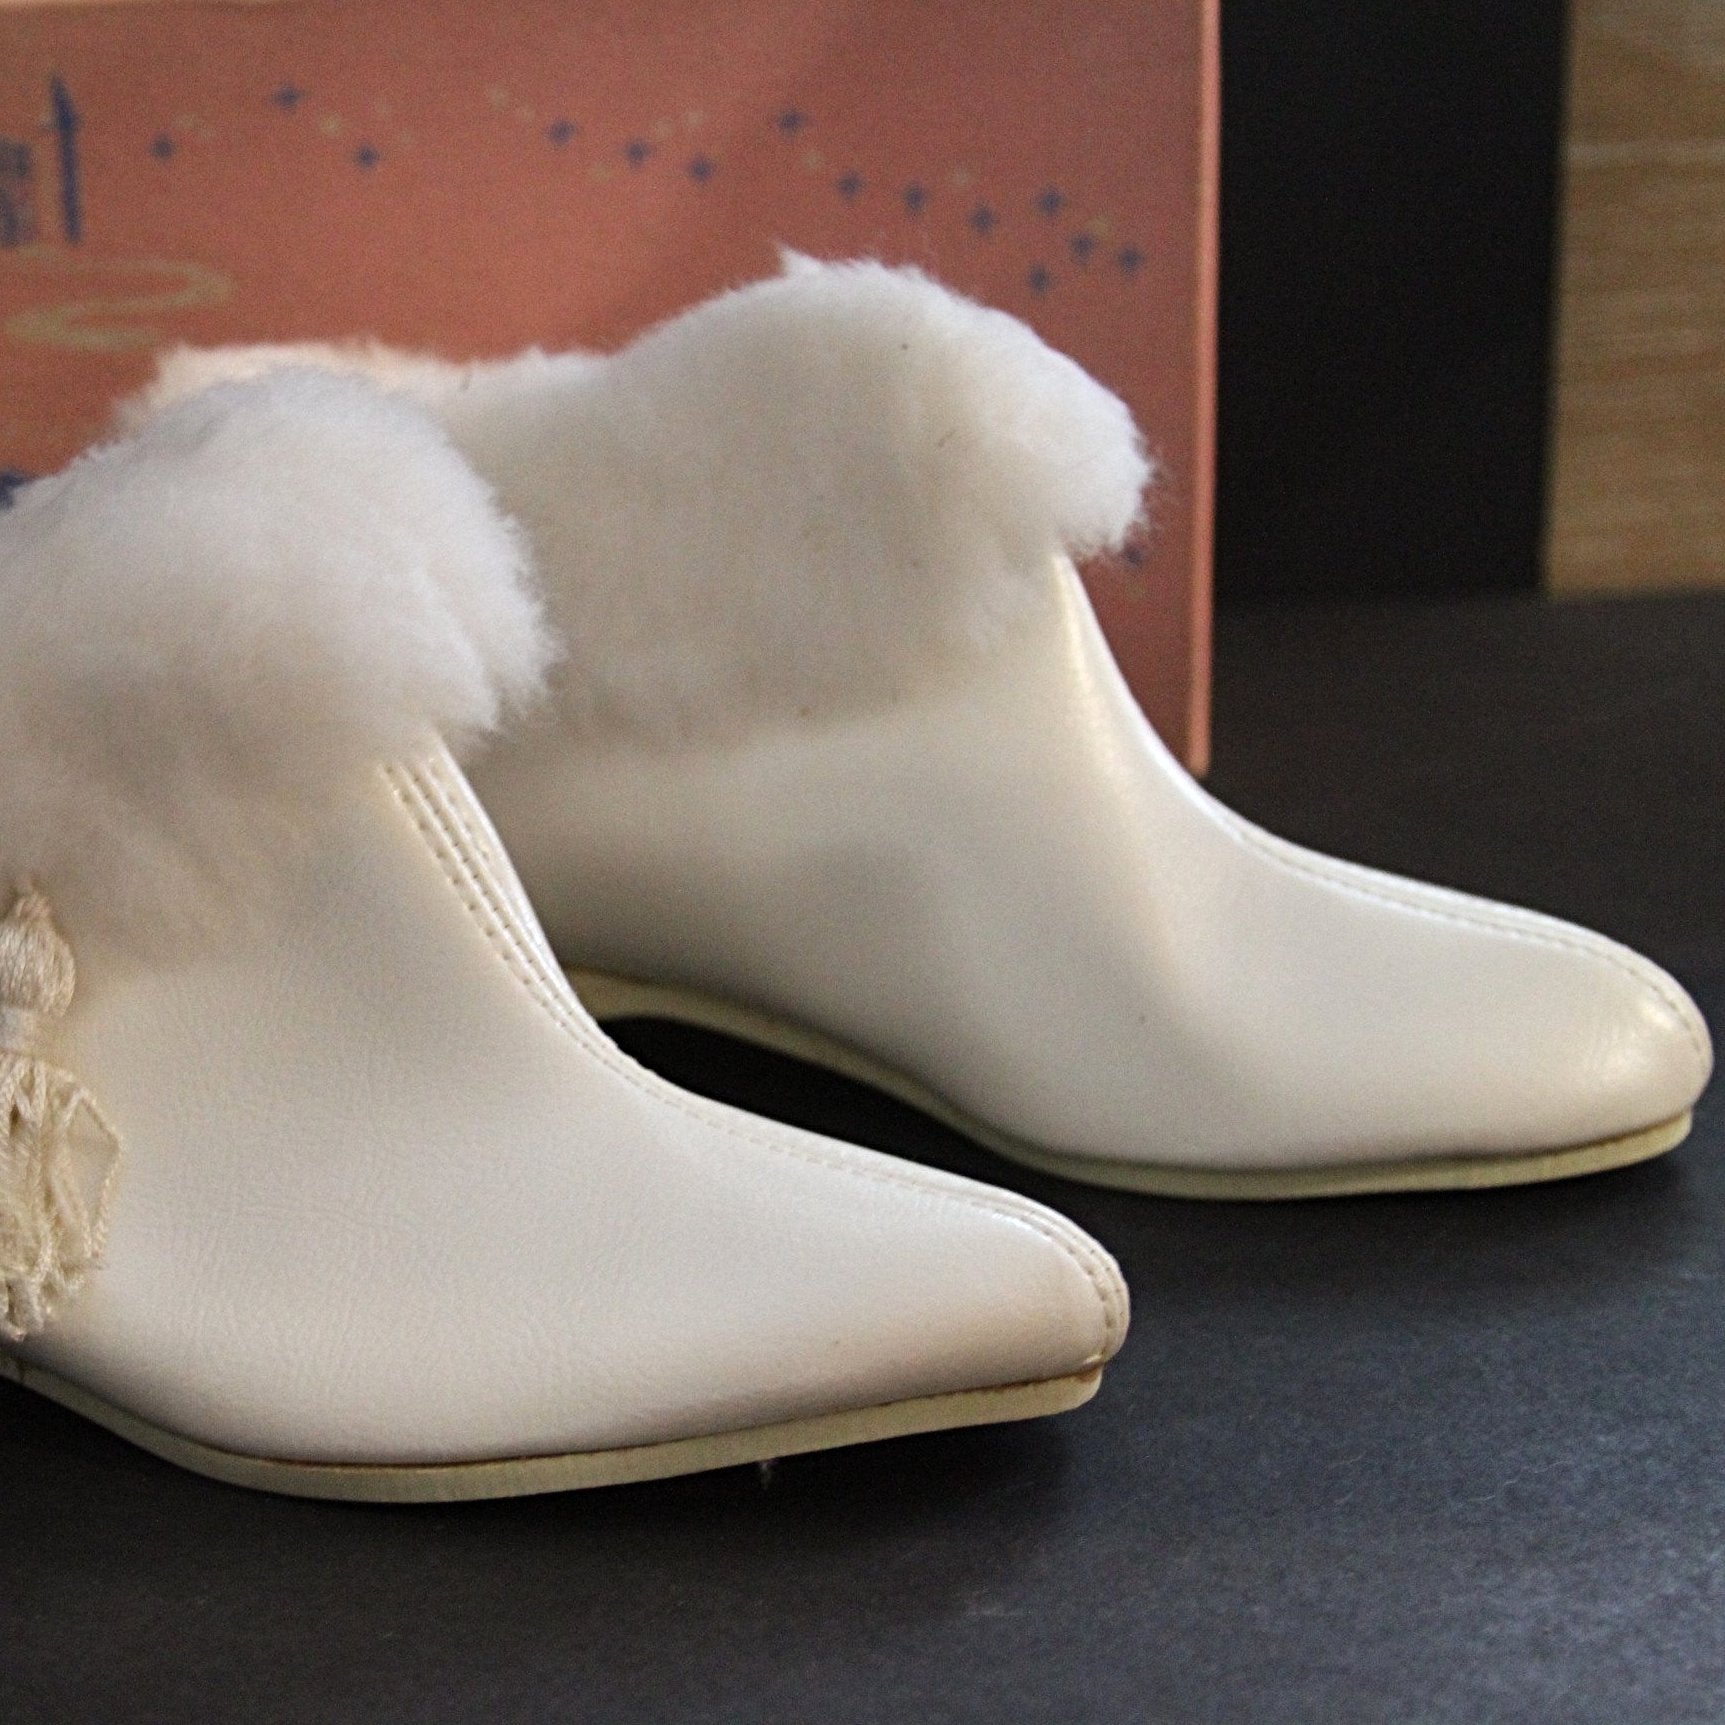 KLICKETTES WHITE GO-GO BOOTS Trimmed in White Fur New Old Stock with Box